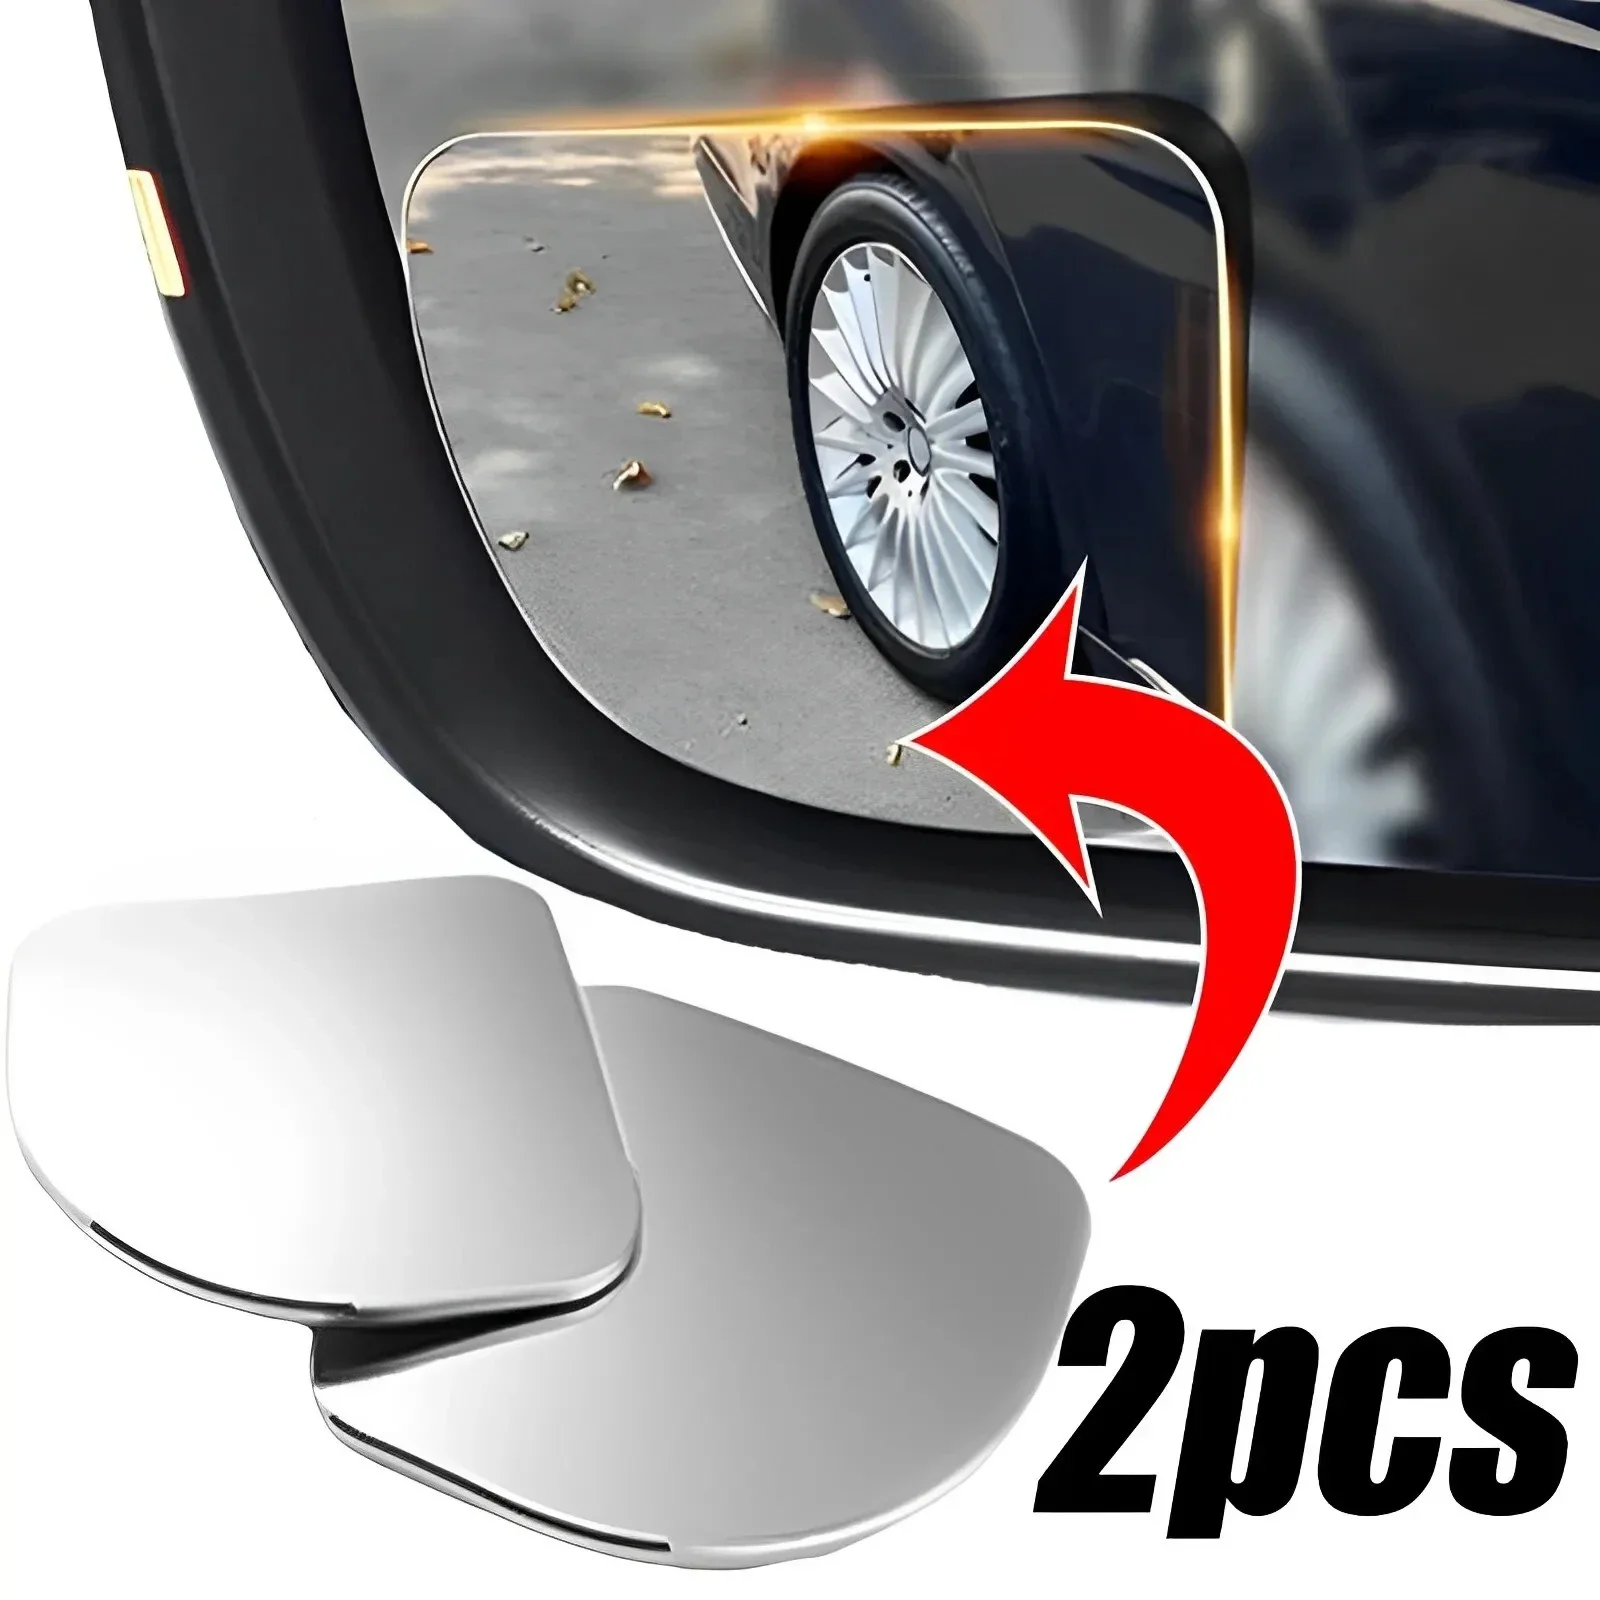 

2pcs Car Wide Angle Car Blind Spot Mirrors 360 Adjustable Auxiliary Rearview Mirrors HD Frameless Small Round Mirror